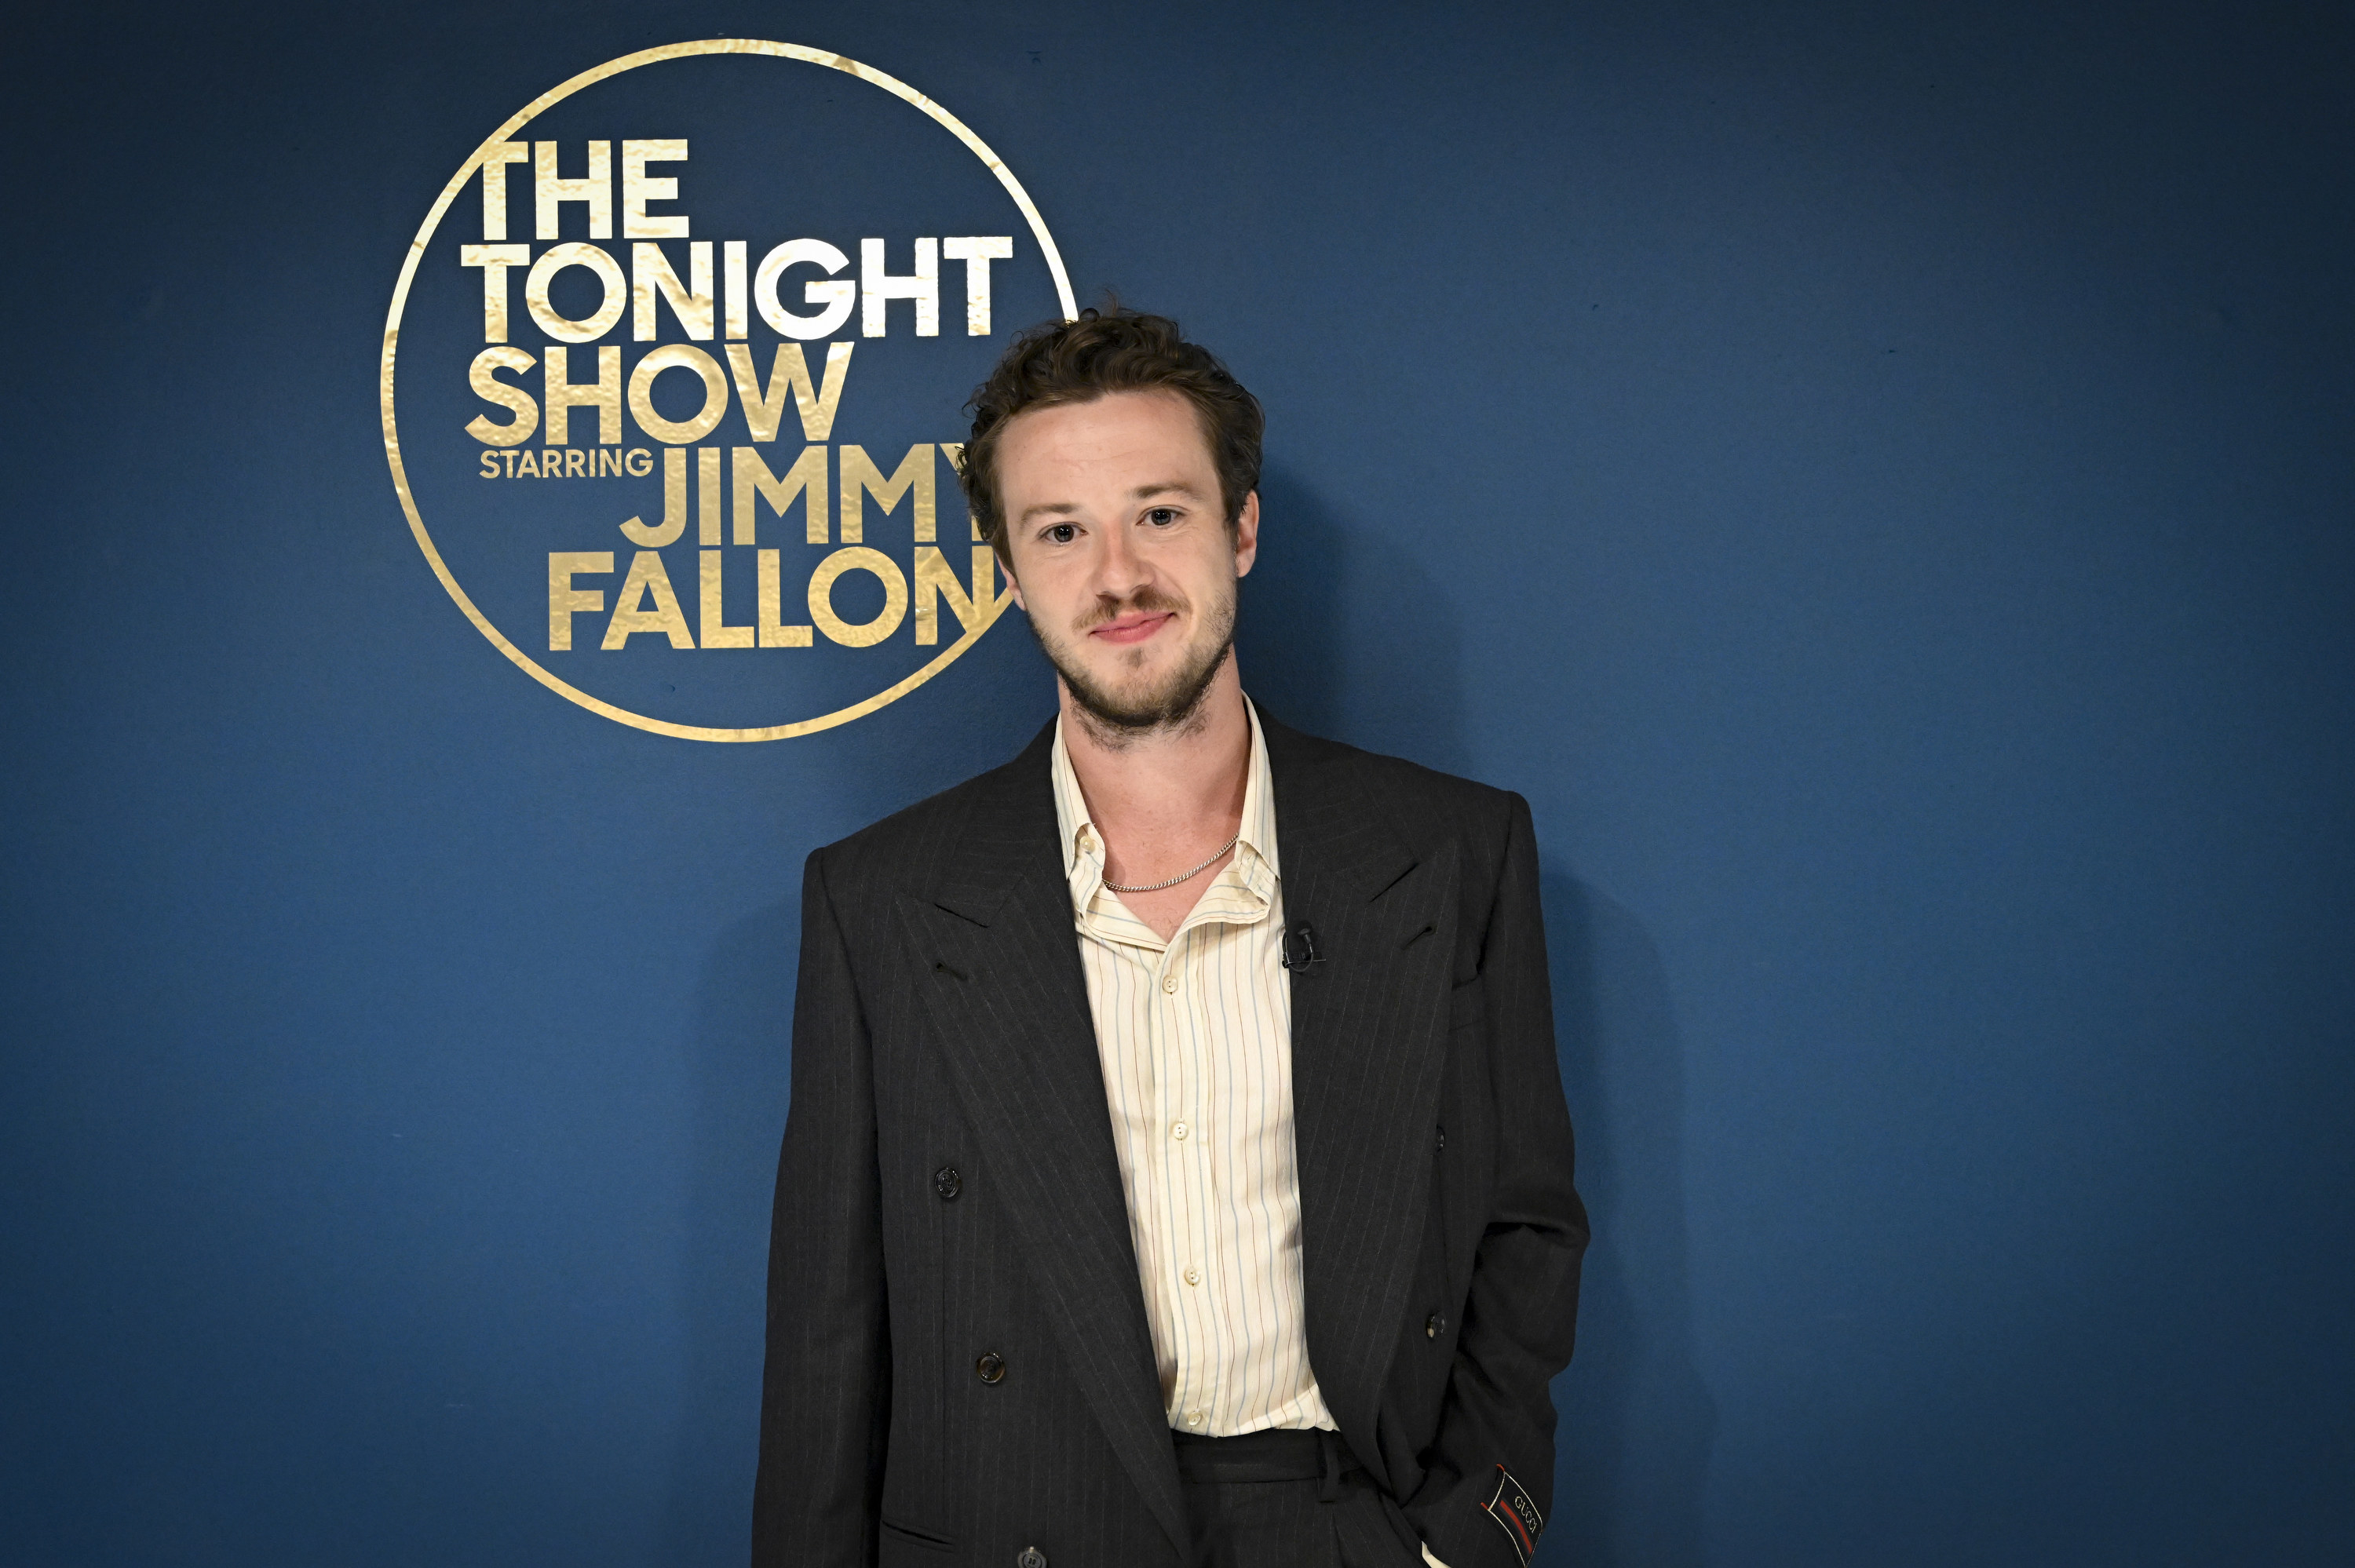 Joseph wears an oversized black blazer with a yellow and white pinstripe shirt; he smiles, standing in front of a navy wall with a gold sign reading &quot;The Tonight Show starring Jimmy Fallon&quot; in a circle